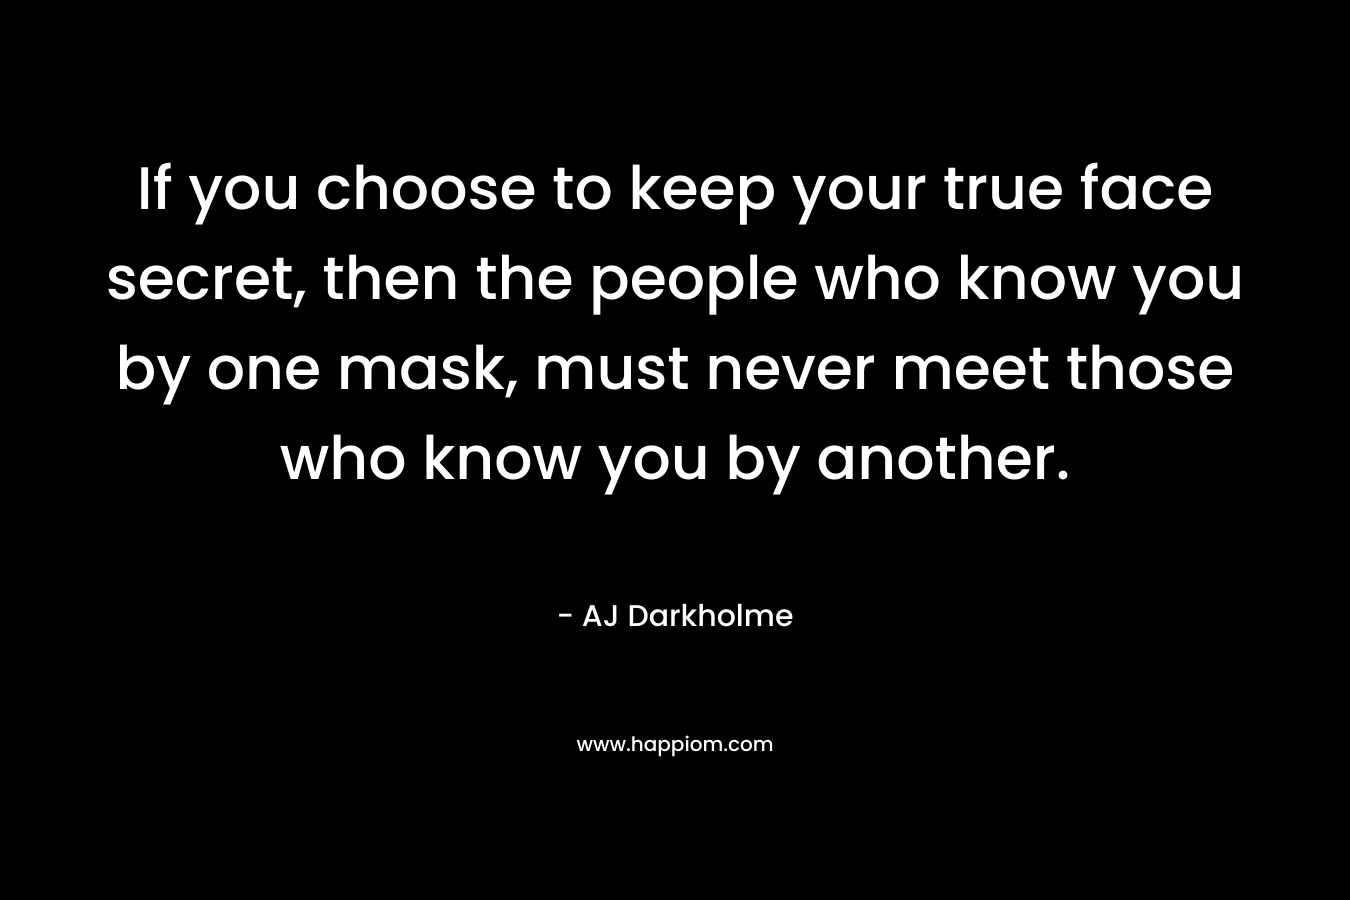 If you choose to keep your true face secret, then the people who know you by one mask, must never meet those who know you by another. – AJ Darkholme